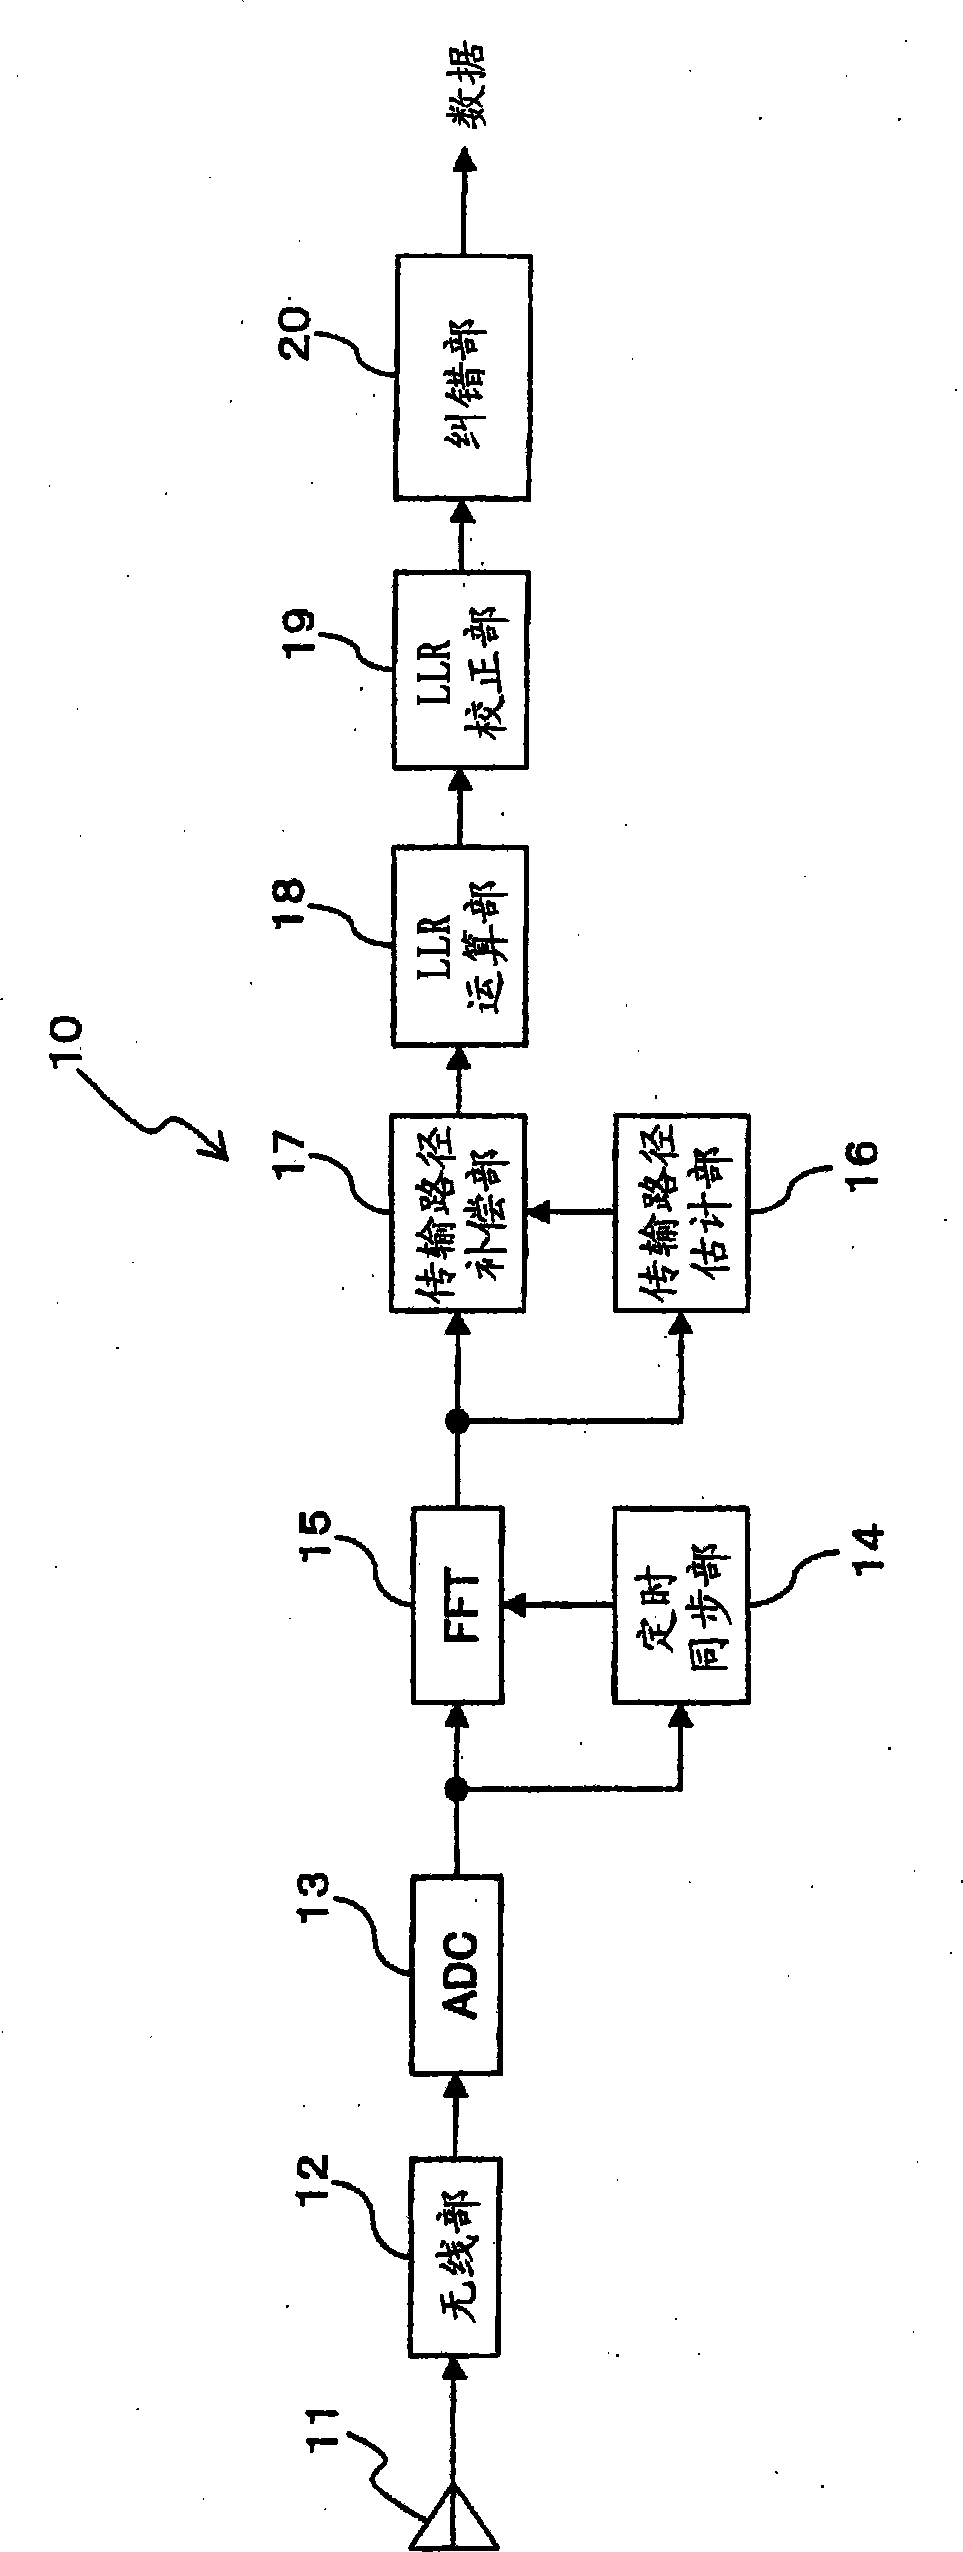 Receiving processing method and receiving device